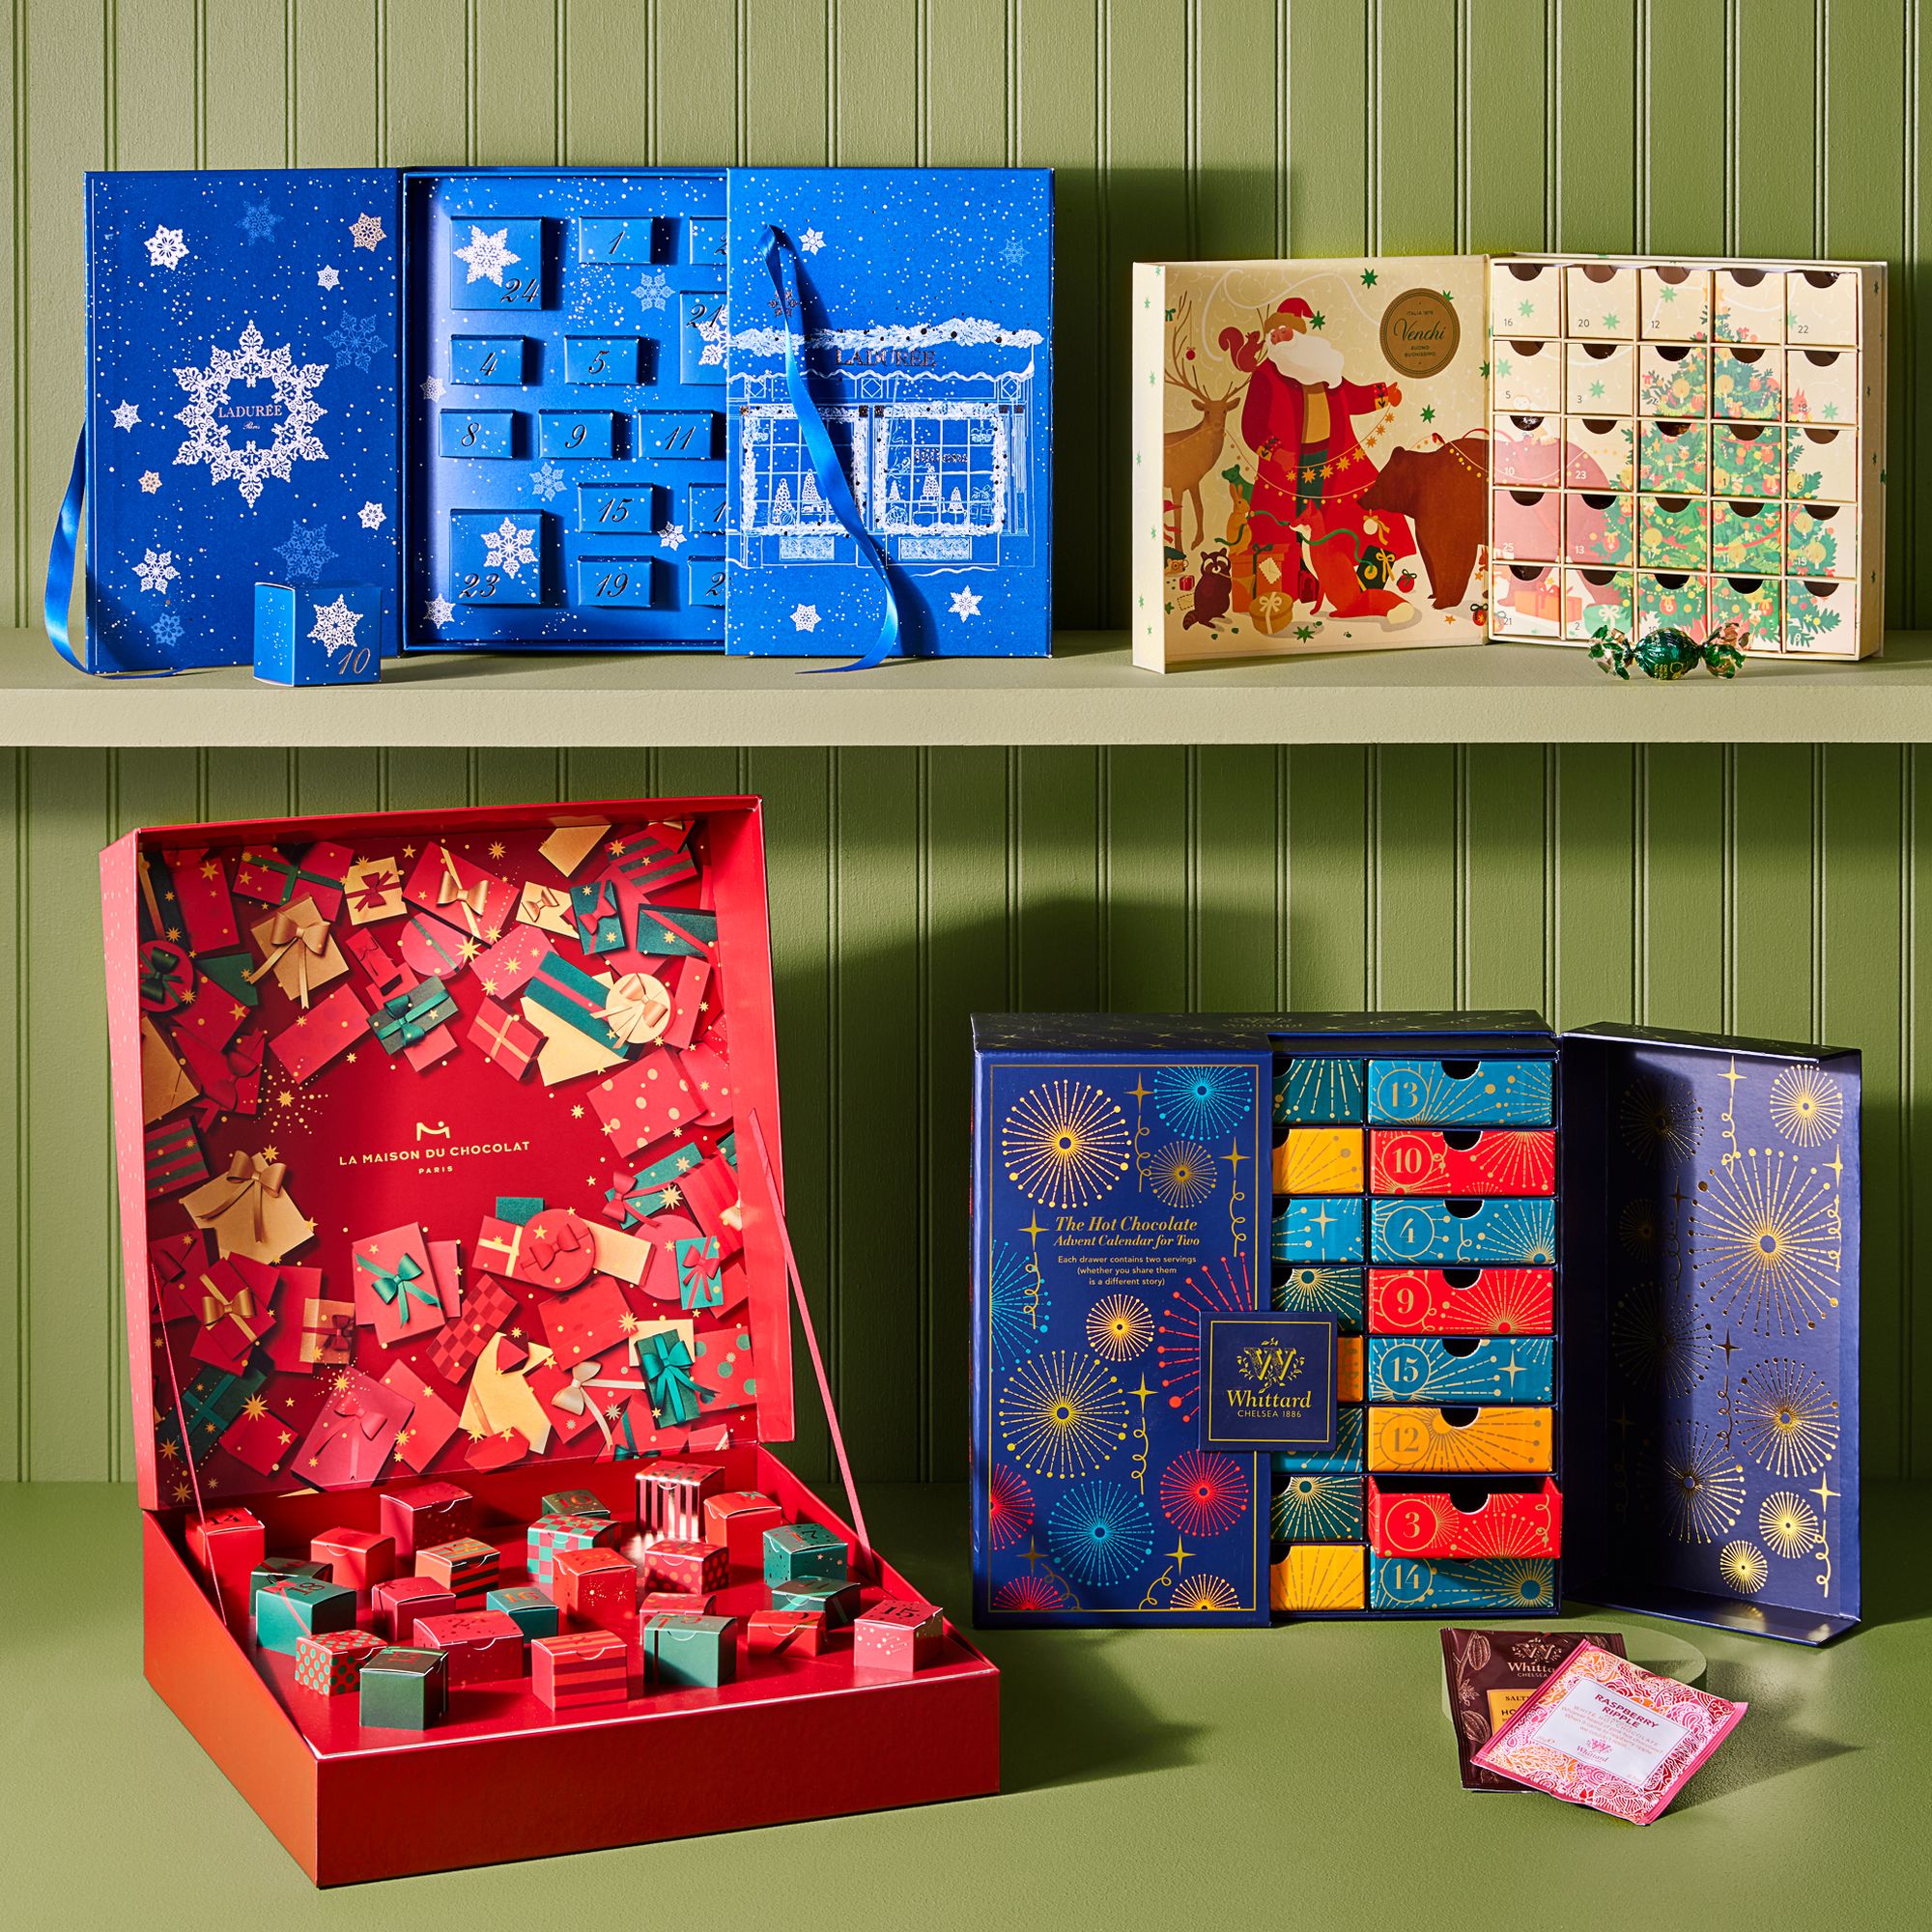 Handmade Holiday Felt Advent Calendars from Global Goods, Only at Food52!  on Food52